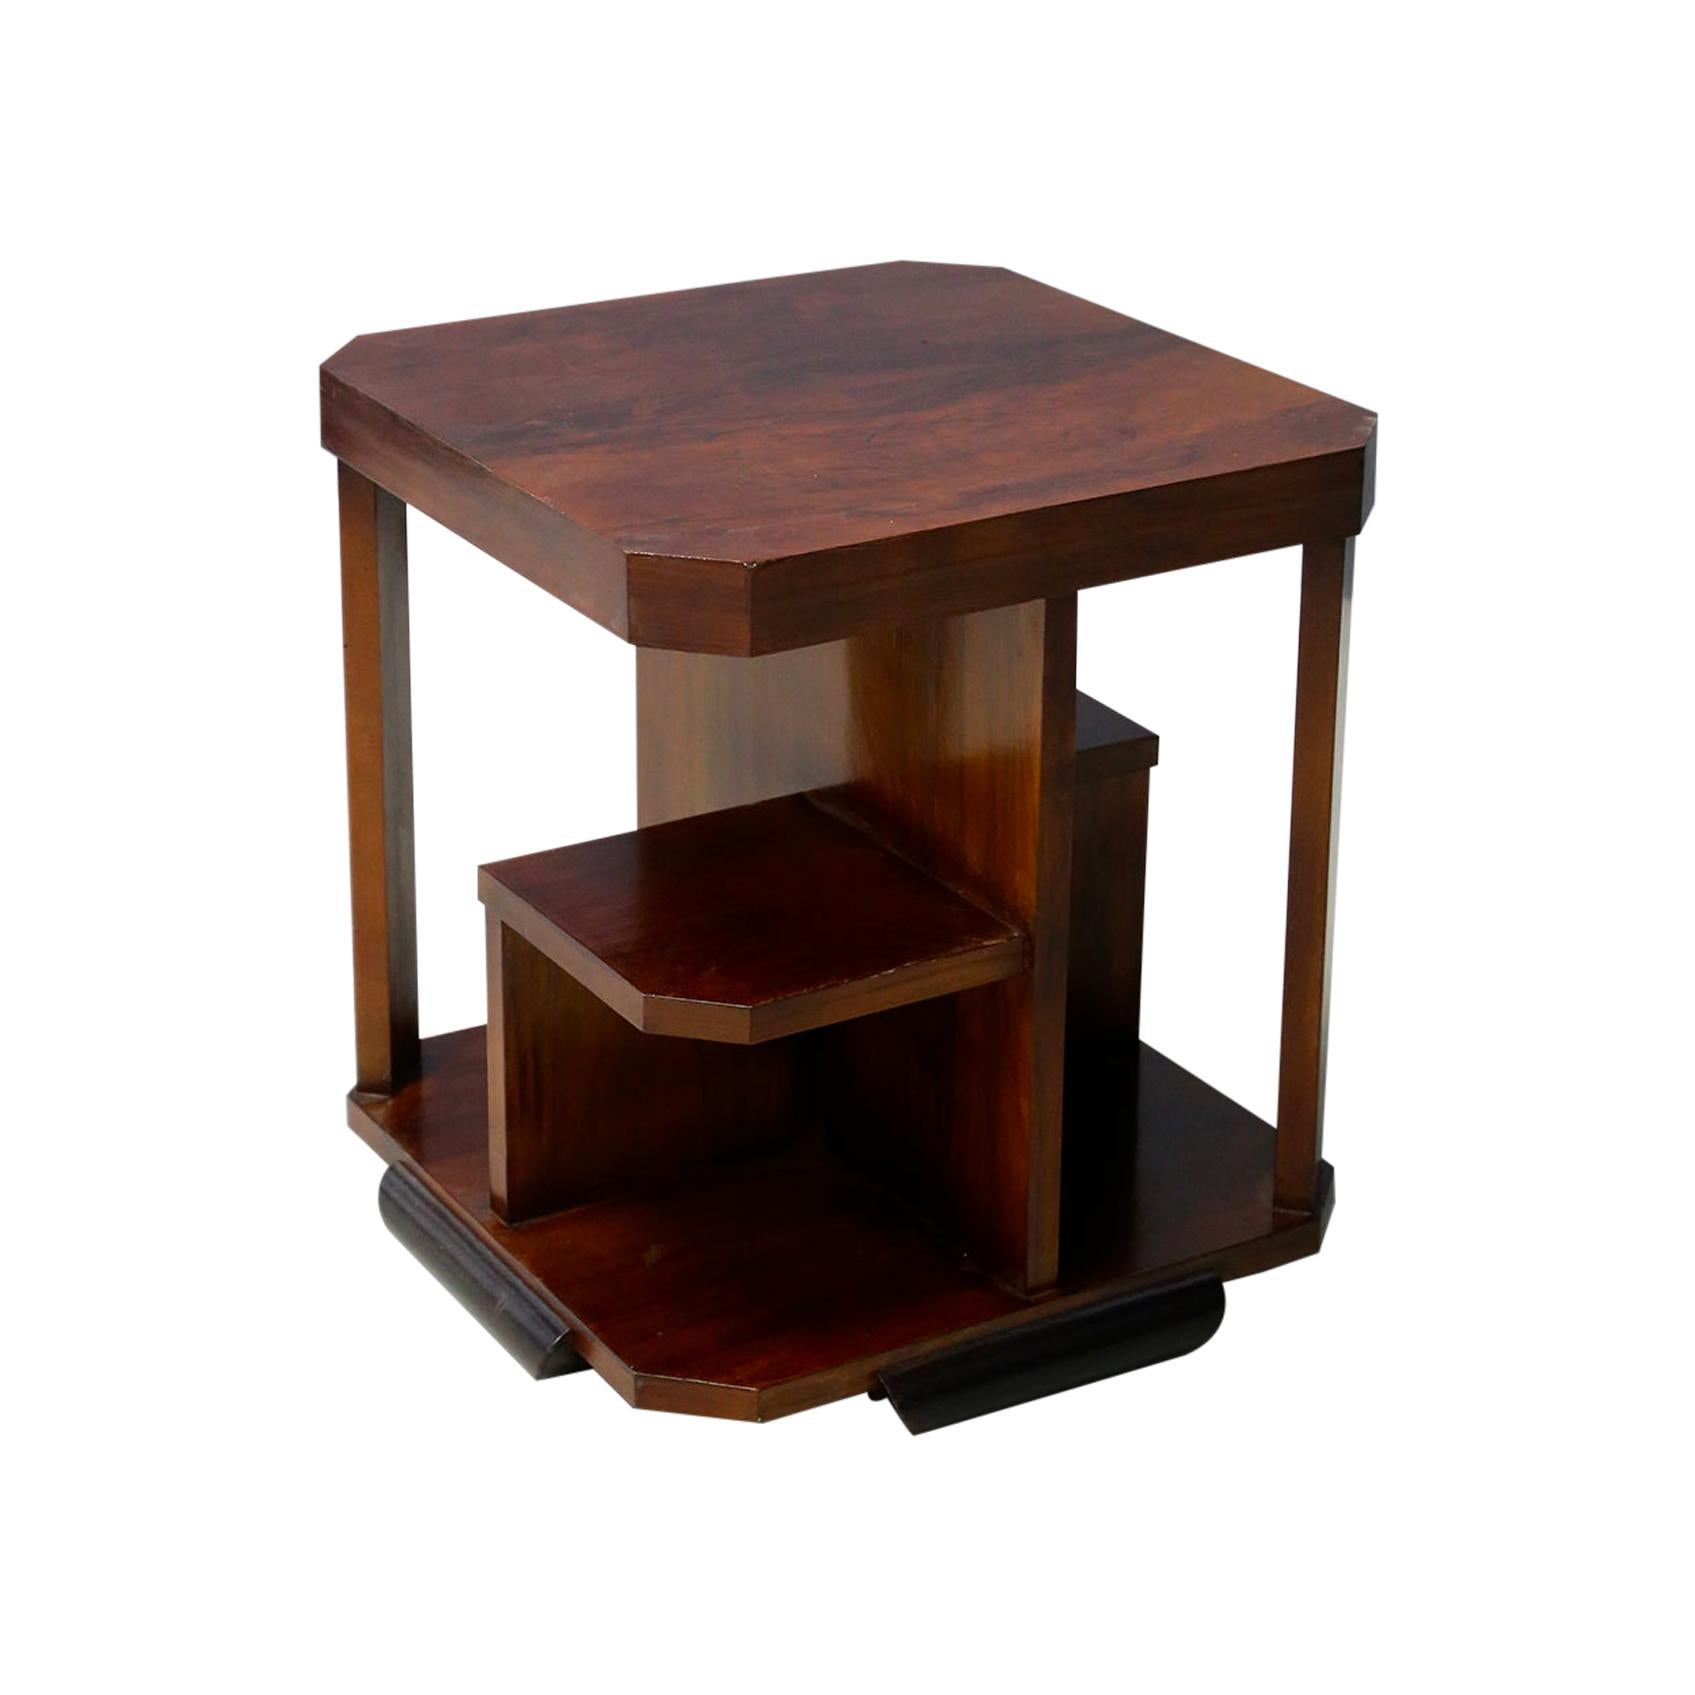 Coffee Table Art Deco Attributed to Gio Ponti in Walnut, 1930s